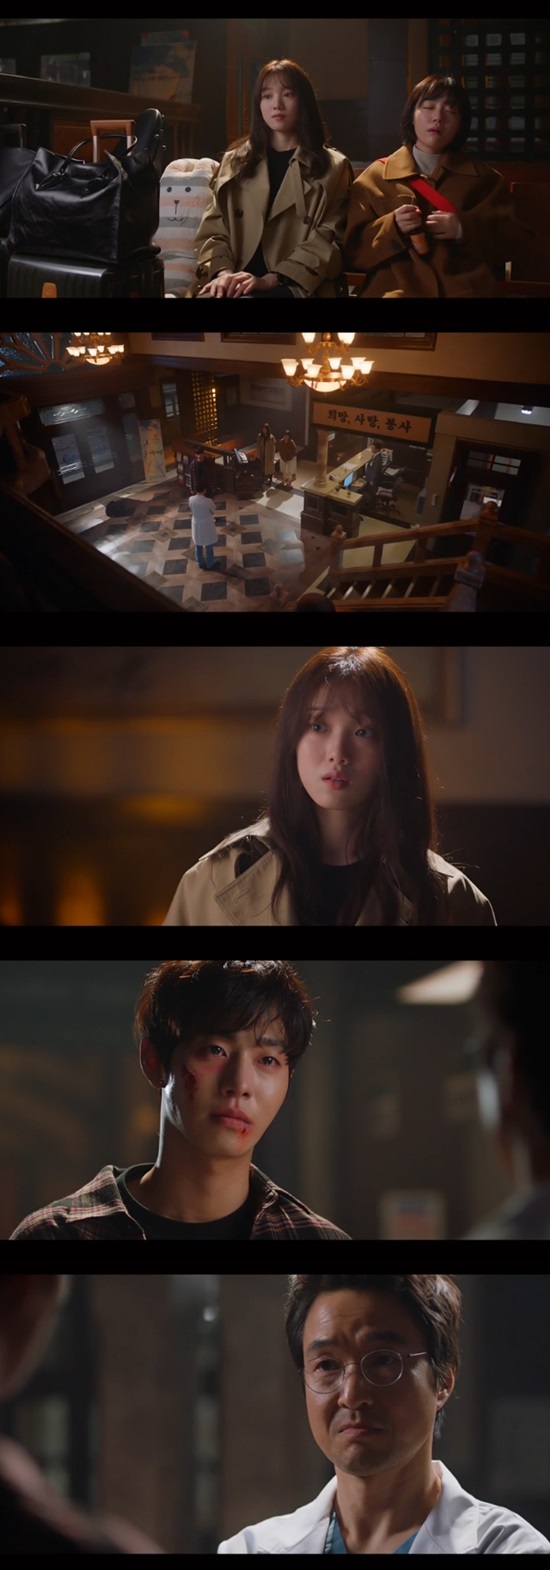 Ahn Hyo-seop Lee Sung-kyung, who has a weakness, entered the Doldam Hospital and filled the first broadcast in 80 minutes.In the first episode of SBSs Romantic Doctor Kim Sabu 2 (playplayplay by Kang Eun-kyung/directed by Yoo In-sik Lee Gil-bok), which was first broadcast on January 6, a new young doctor was shown visiting the stone wall.Kim Sabu (Han Suk-kyu) appeared in the giant Hospital Primal Vow.Kim visited the Primal Vow because the young doctors of the Doldam were away.Do Yoon-wan (Choi Jin-ho), who returned to the foundations chairman, estimated that Kim Sa-bu ignored others in his savvy taste and left without the patience of young doctors, but Jang Gi-tae (Im Won-hee), the head of the administrative office of the Doldam, refuted.Jang Jang-tae said, Kang Dong-ju (Yoo Yeon-seok) is called by the country to serve the military service to the island area, Yoon Seo-jung (Seo Hyun-jin) is exchanged for a one-year contract, and Do In-beom (Yang Se-jong) is returning to Primal Vow. Kim Sa-bu was still alive.In the meantime, Kim watched the huge Hospital live suzerain, saved a patient who fell into Danger, and Lee Sung-kyung, who happened to watch it closest, admired him, asking, What logic did you know at once?But Kim returned the vitriolic remarks to Cha Eun-jae, who asked questions about the patients in the emergency room, saying, Logic is like a shit.Seo Woo Jin (Ahn Hyo-seop) saved an emergency patient on the subway on his way to Hospital while working part-time at the construction site, and met with Cha Eun-jae at Hospital and revealed his past history.Seo Woo Jin went to his senior hospital in hopes of a billion won salary, exposed internal corruption, and was photographed as a whistleblower who hit the same doctor and was in the industry store Danger.Seo Woo Jin and Cha Eun Jae together made a surgical mask, and Cha Eun Jae fell down and Suggical mask depression, which is a weakness of Cha Eun Jae, was revealed.Seo Woo Jin ran with Cha Eun-jae as he did in the past anatomy practice time.With such curiosity in the past history of Seo Woo Jin and Cha Eun Jae, Kim Sabu watched the surgical mask and listened to the surroundings and noticed their situation.Seo Woo Jin was kicked out of Hospital after finishing the surgical mask, and Kim went to Seo Woo Jin and suggested a scout, saying, Do you need a job?Cha Eun-jae reluctantly went to the stone wall from the position of being forced to choose between honesty and dispatching a branch for falling asleep during the surgical mask.Yoon A-reum (Sho Ju-yeon), who was helped by Kim Sa-bu in the emergency room, chose the Hospital line directly.At the end of the broadcast, Cha Eun-jae arrived at the Hospital in turn and while Kim was waiting for the Kim Sabu to finish the surgical mask, Seo Woo Jin fled to the Hospital to avoid the debtors, and said to Kim Sabu, who had just left the Surgical mask room, Do you need a job?But I need money. How much can you give me? How much will you buy?Yoo Gyeong-sang